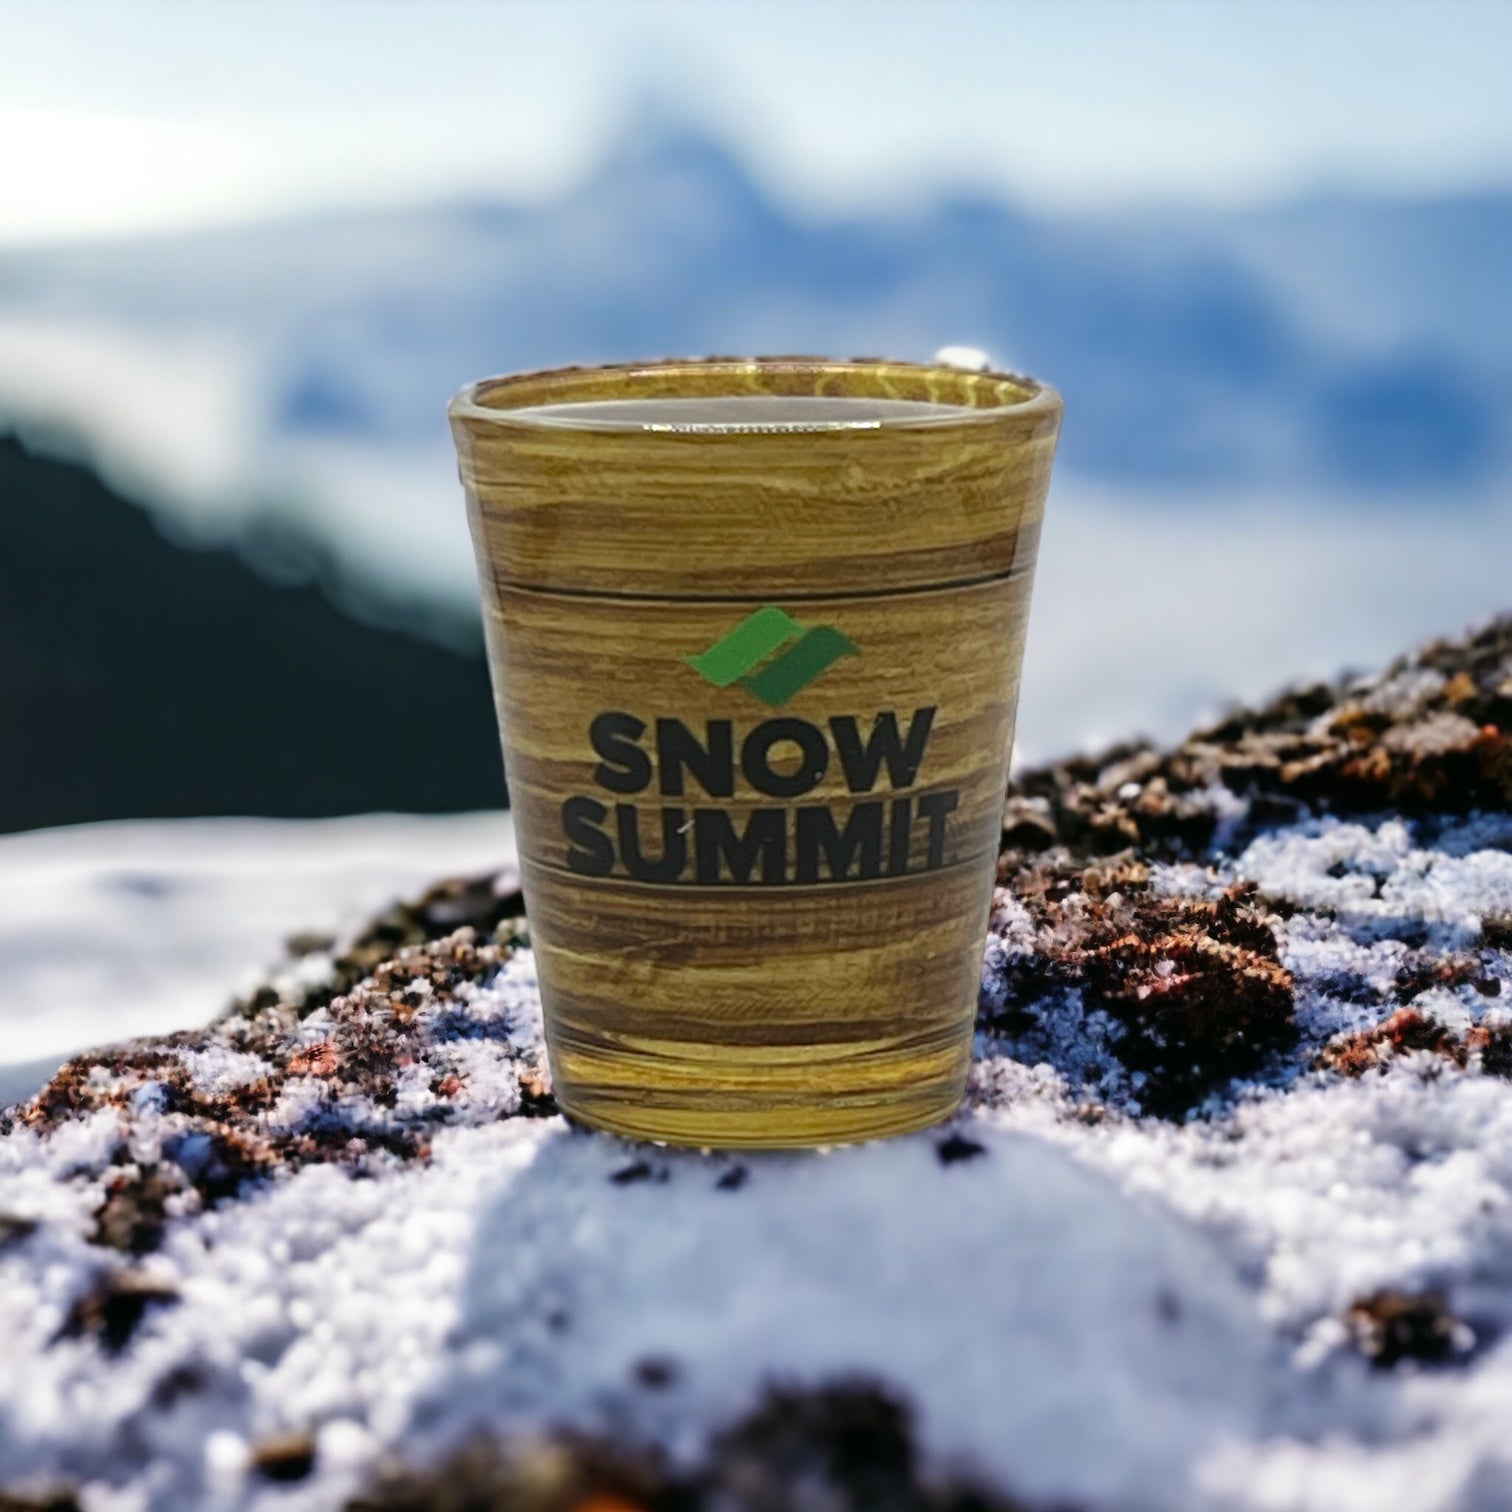 Snow Summit shot glass with wooden wrap design